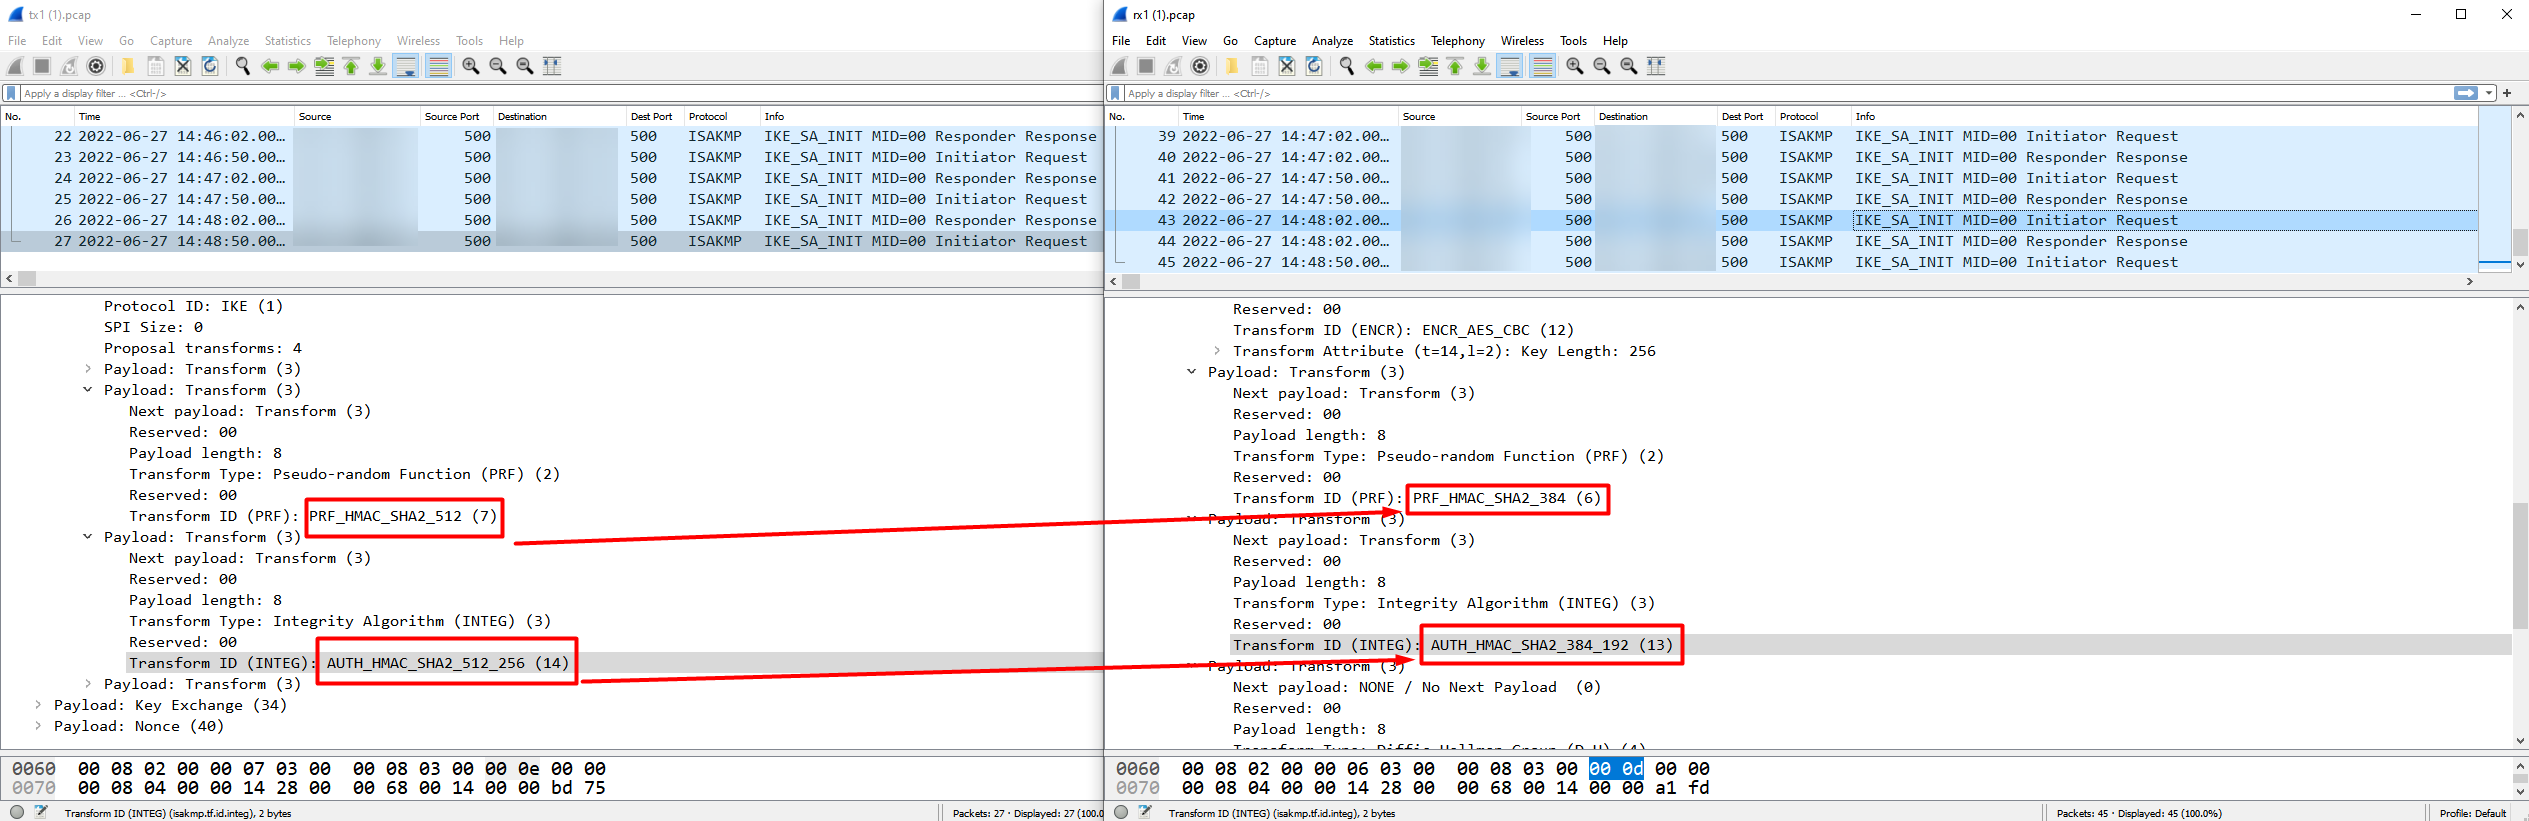 Comparing Wireshark for Phase 1 Authentication mismatch